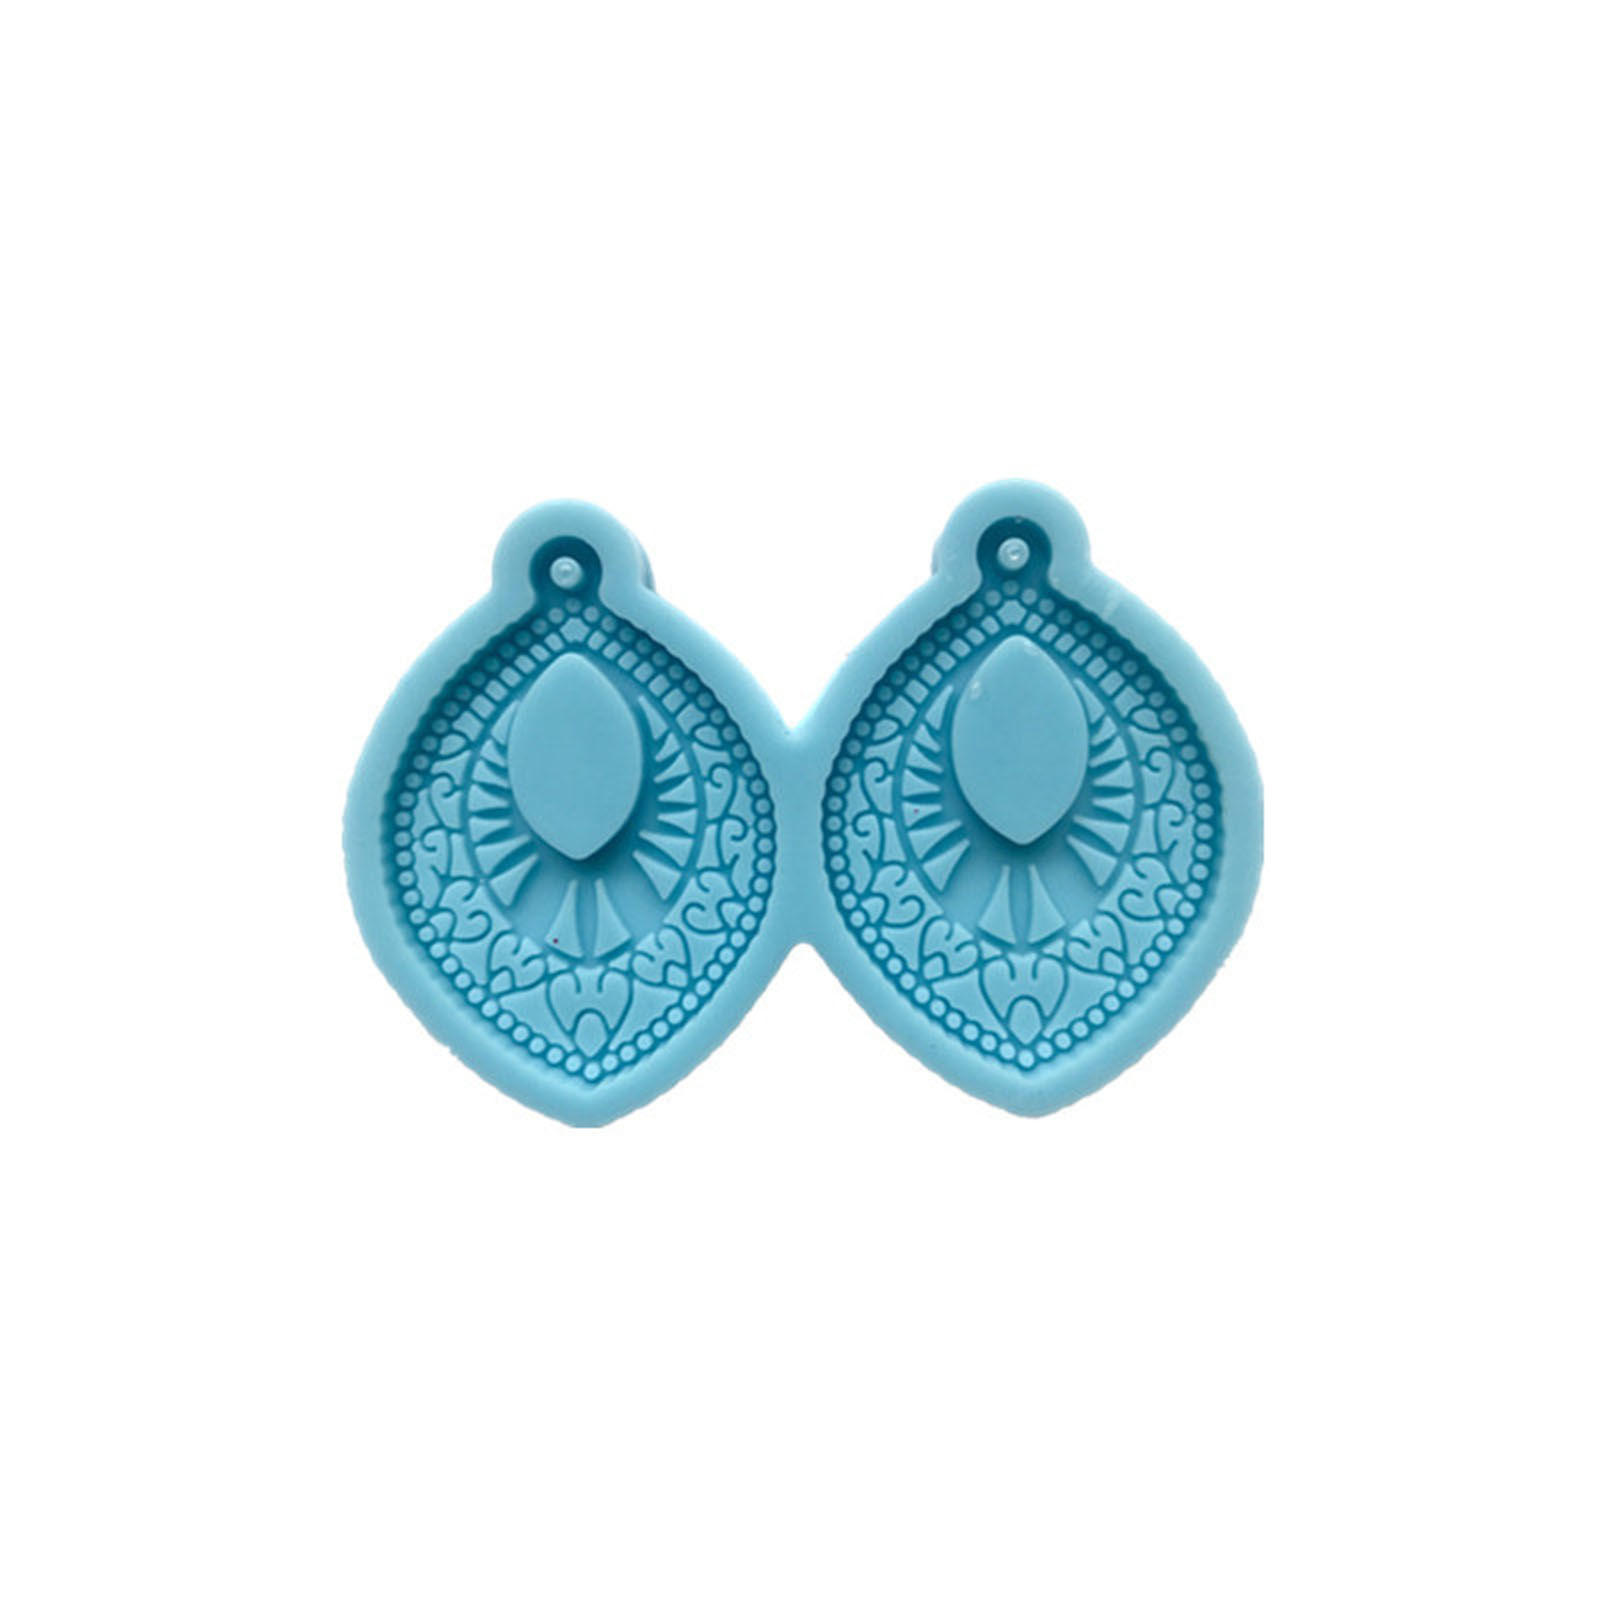 Picture of Silicone Resin Mold For Jewelry Making Pendant Earrings  Oval Carved Pattern Blue 6.5cm x 4.5cm, 5 PCs